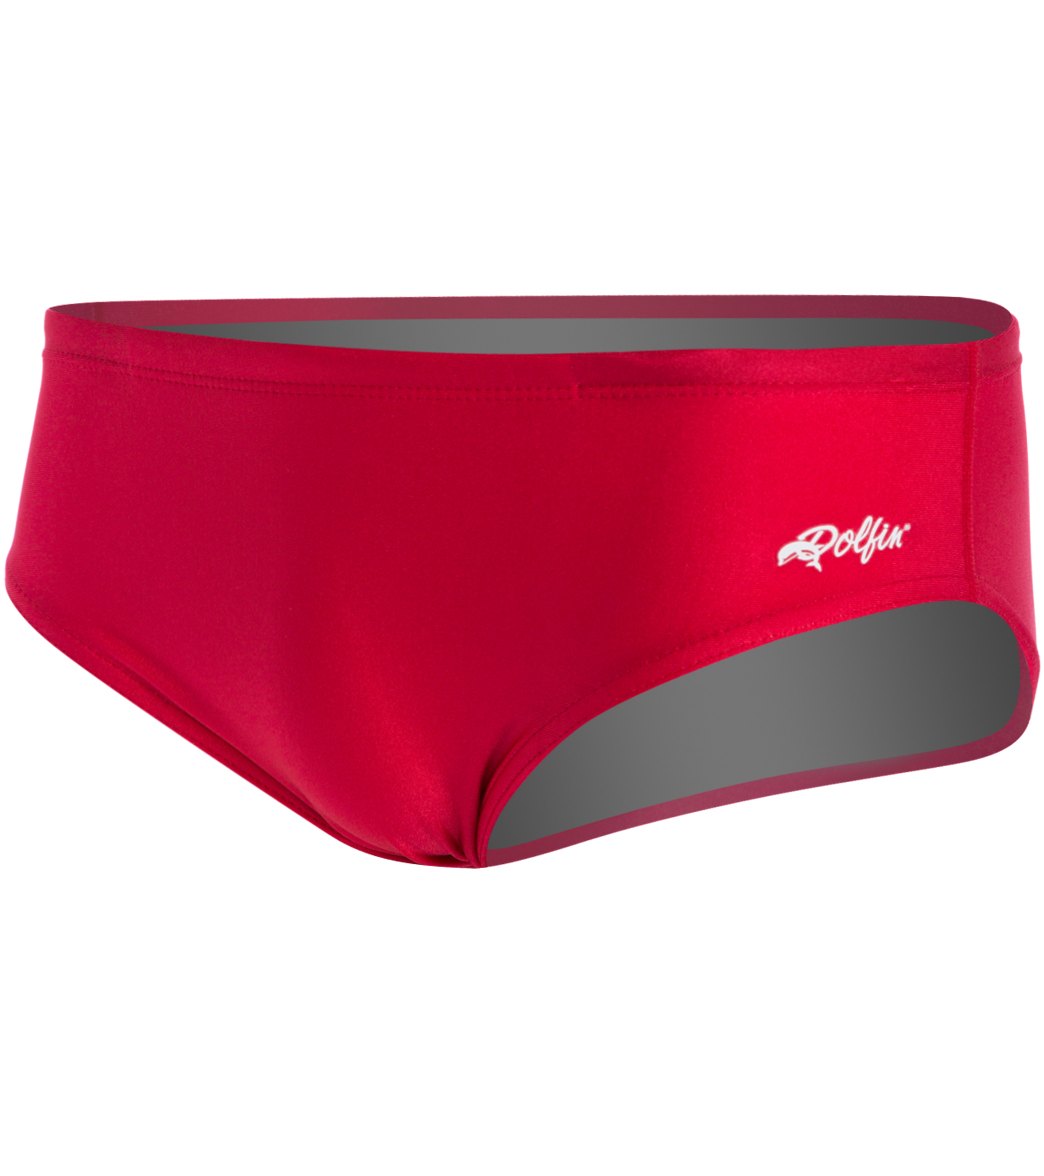 Dolfin Xtra Life Lycra Solid Male Racer Brief Swimsuit at SwimOutlet.com